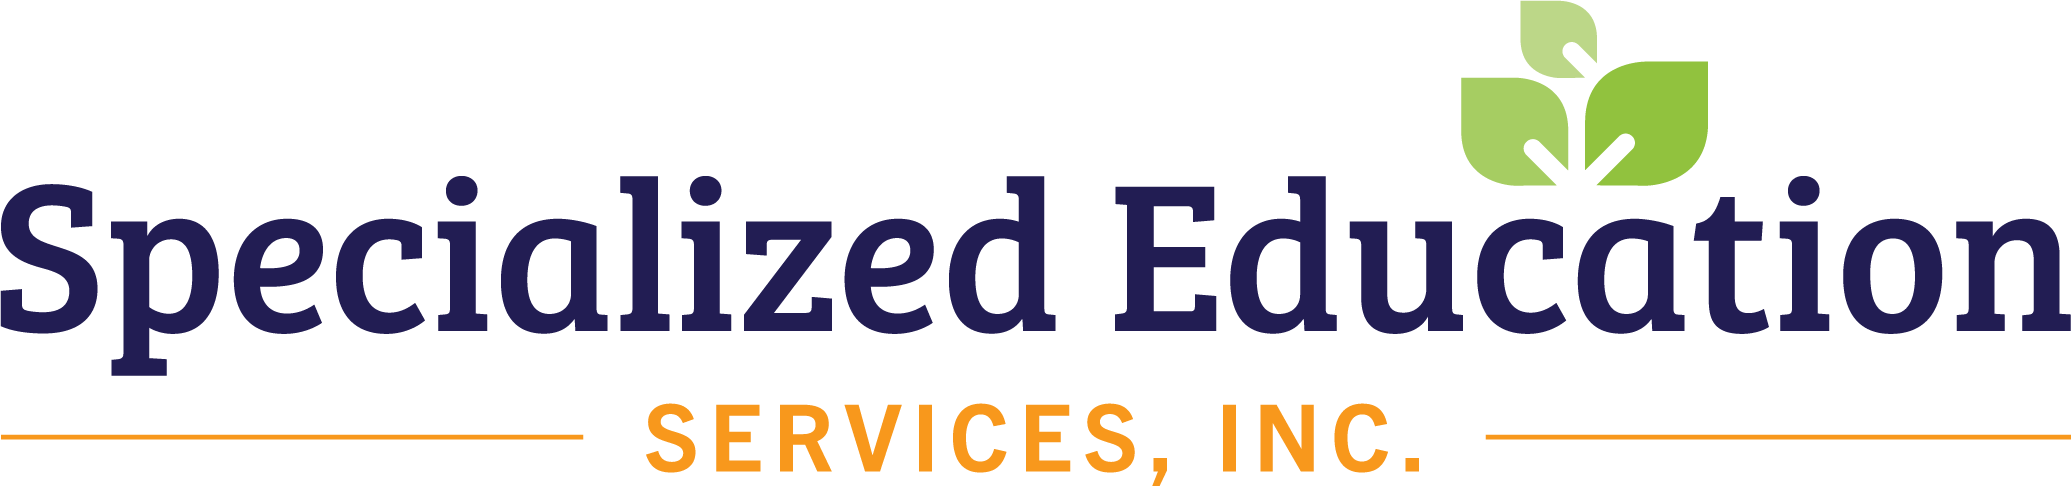 Specialized Education Services, Inc. logo